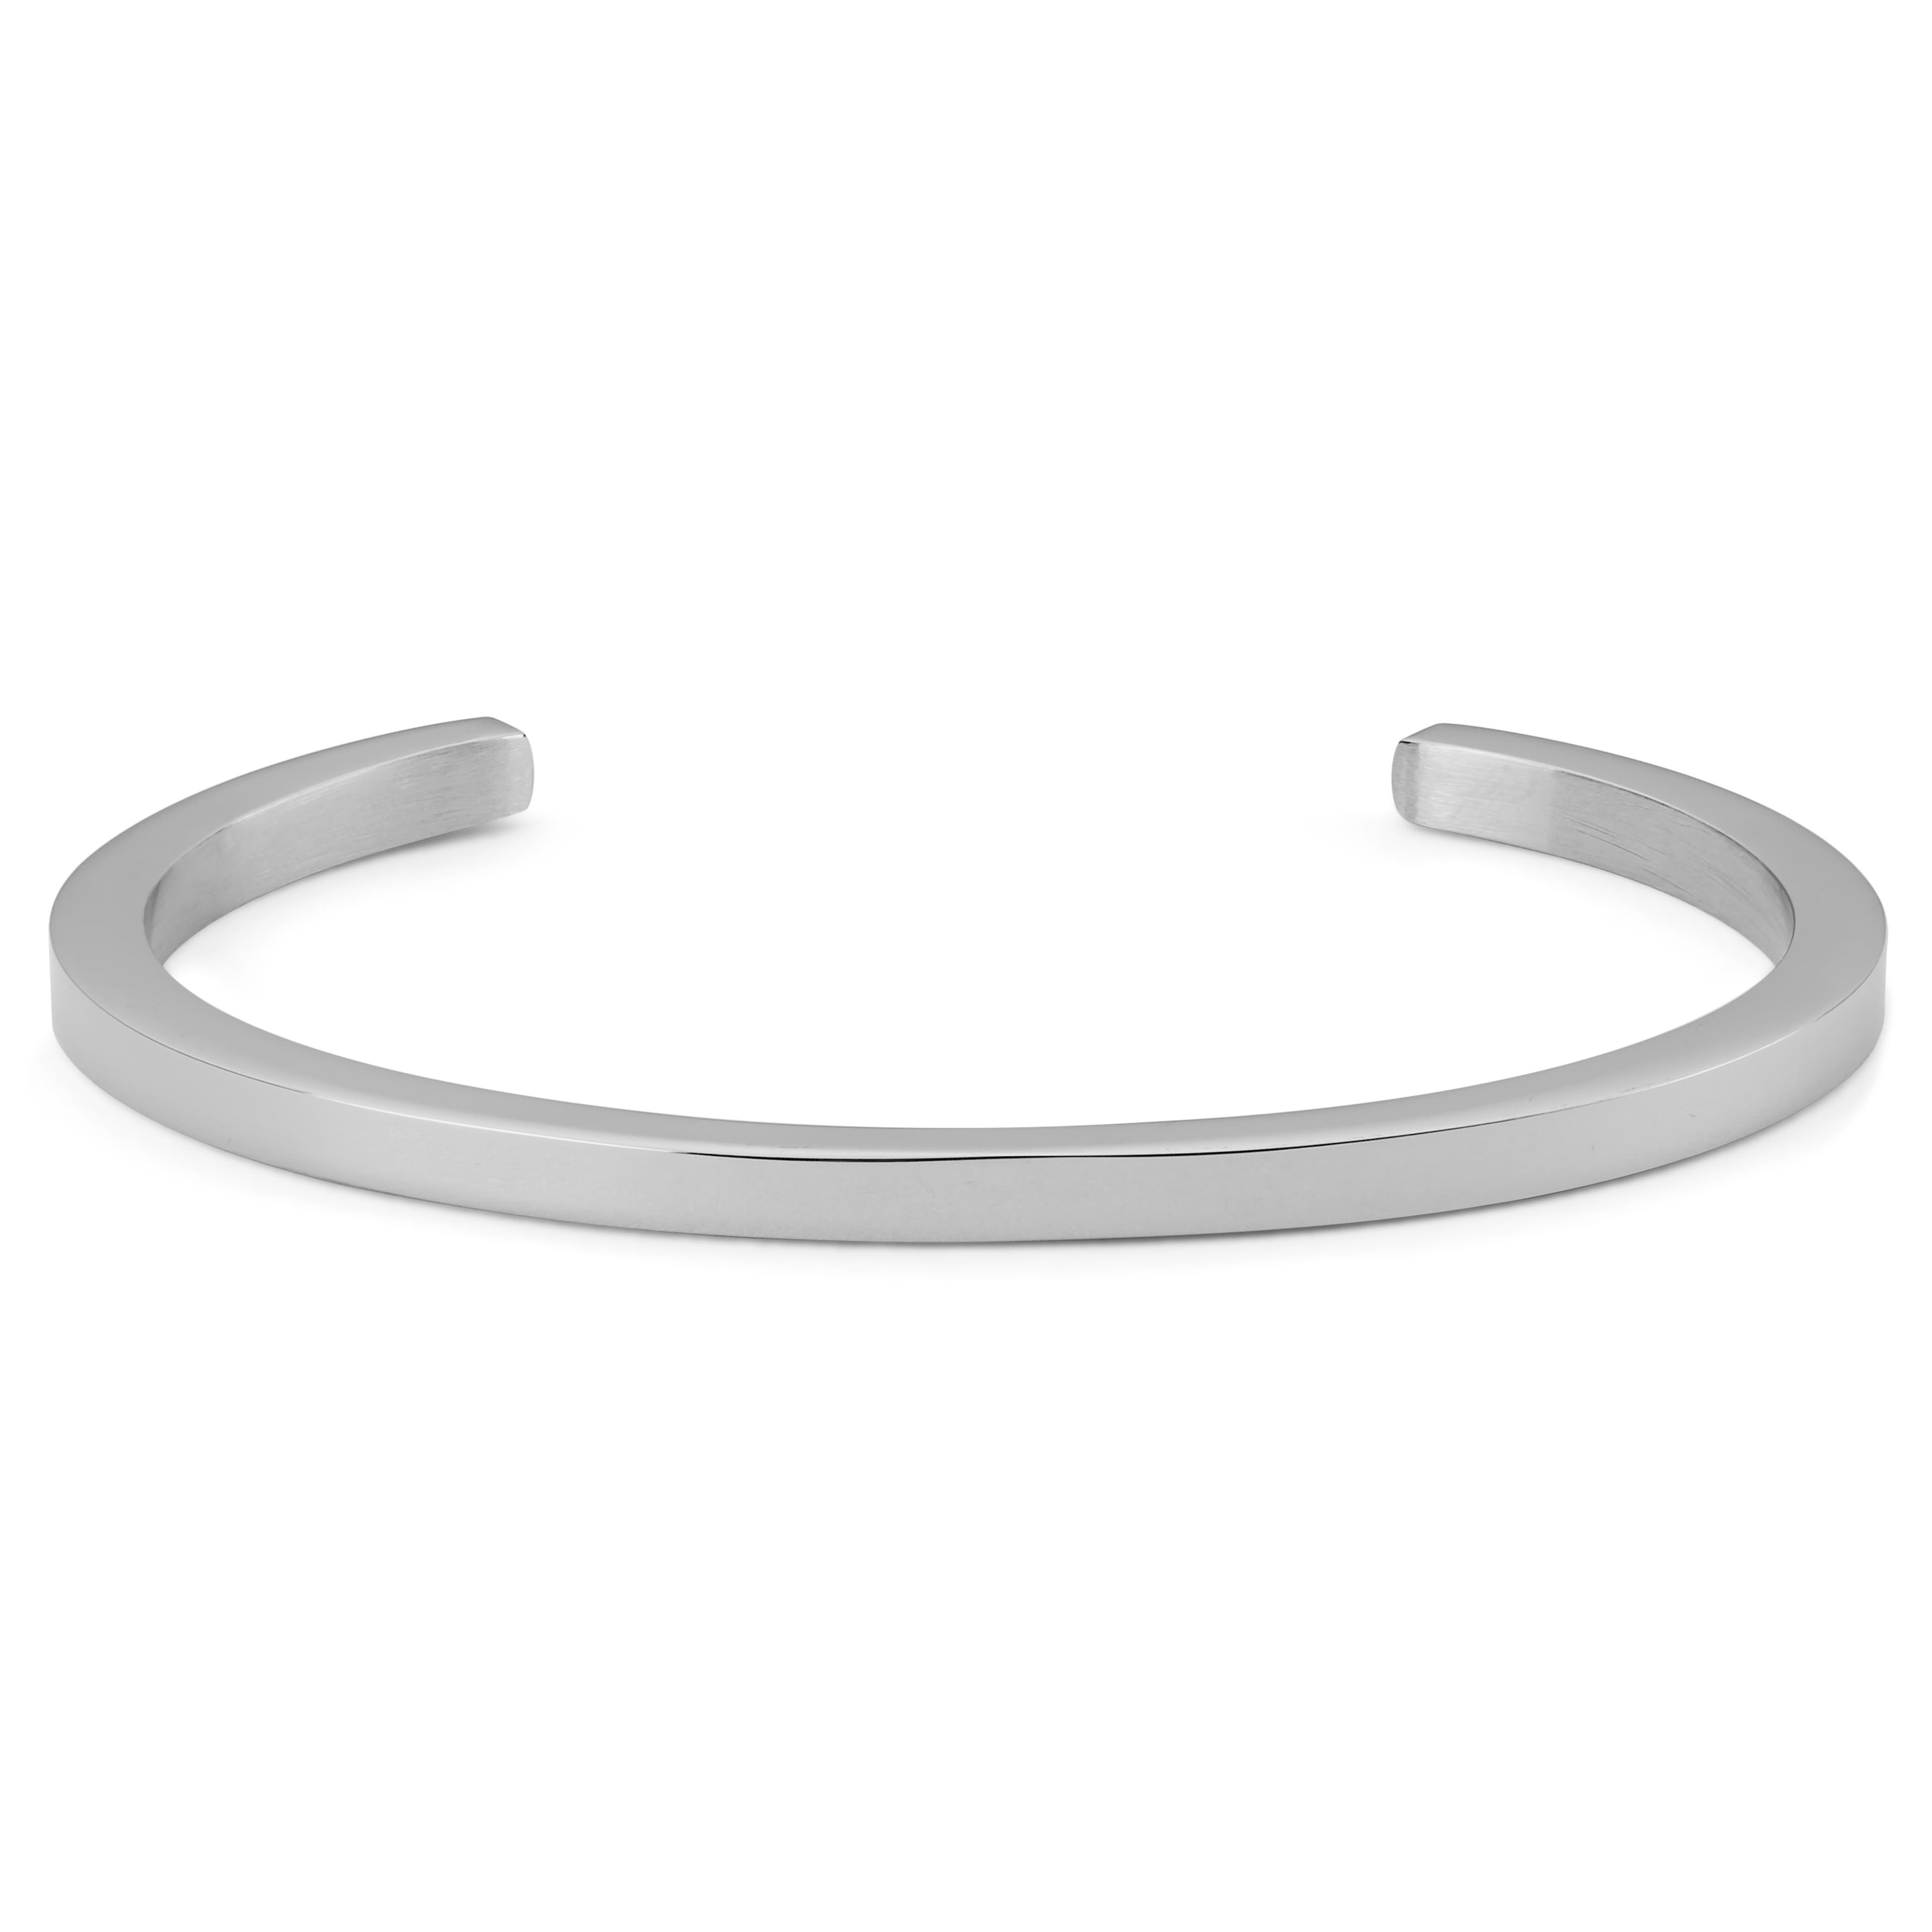 Thin Silver-Tone Stainless Steel Cuff Bracelet